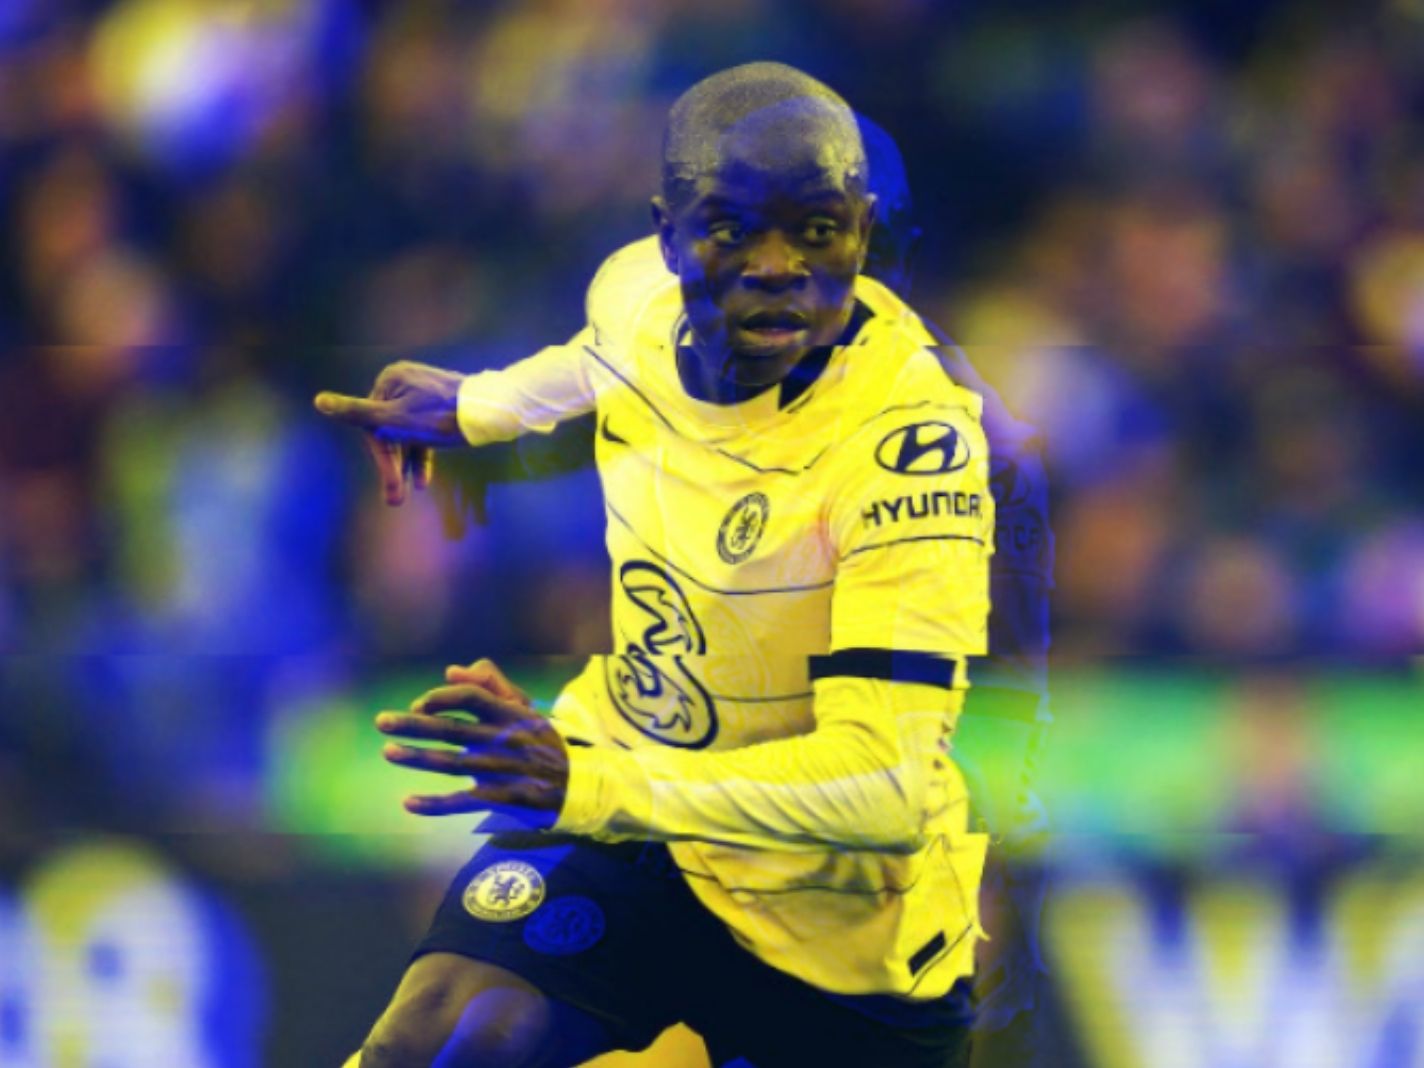 Twitter reacts to Wilfred Ndidi getting his ankles broken by N’Golo Kante